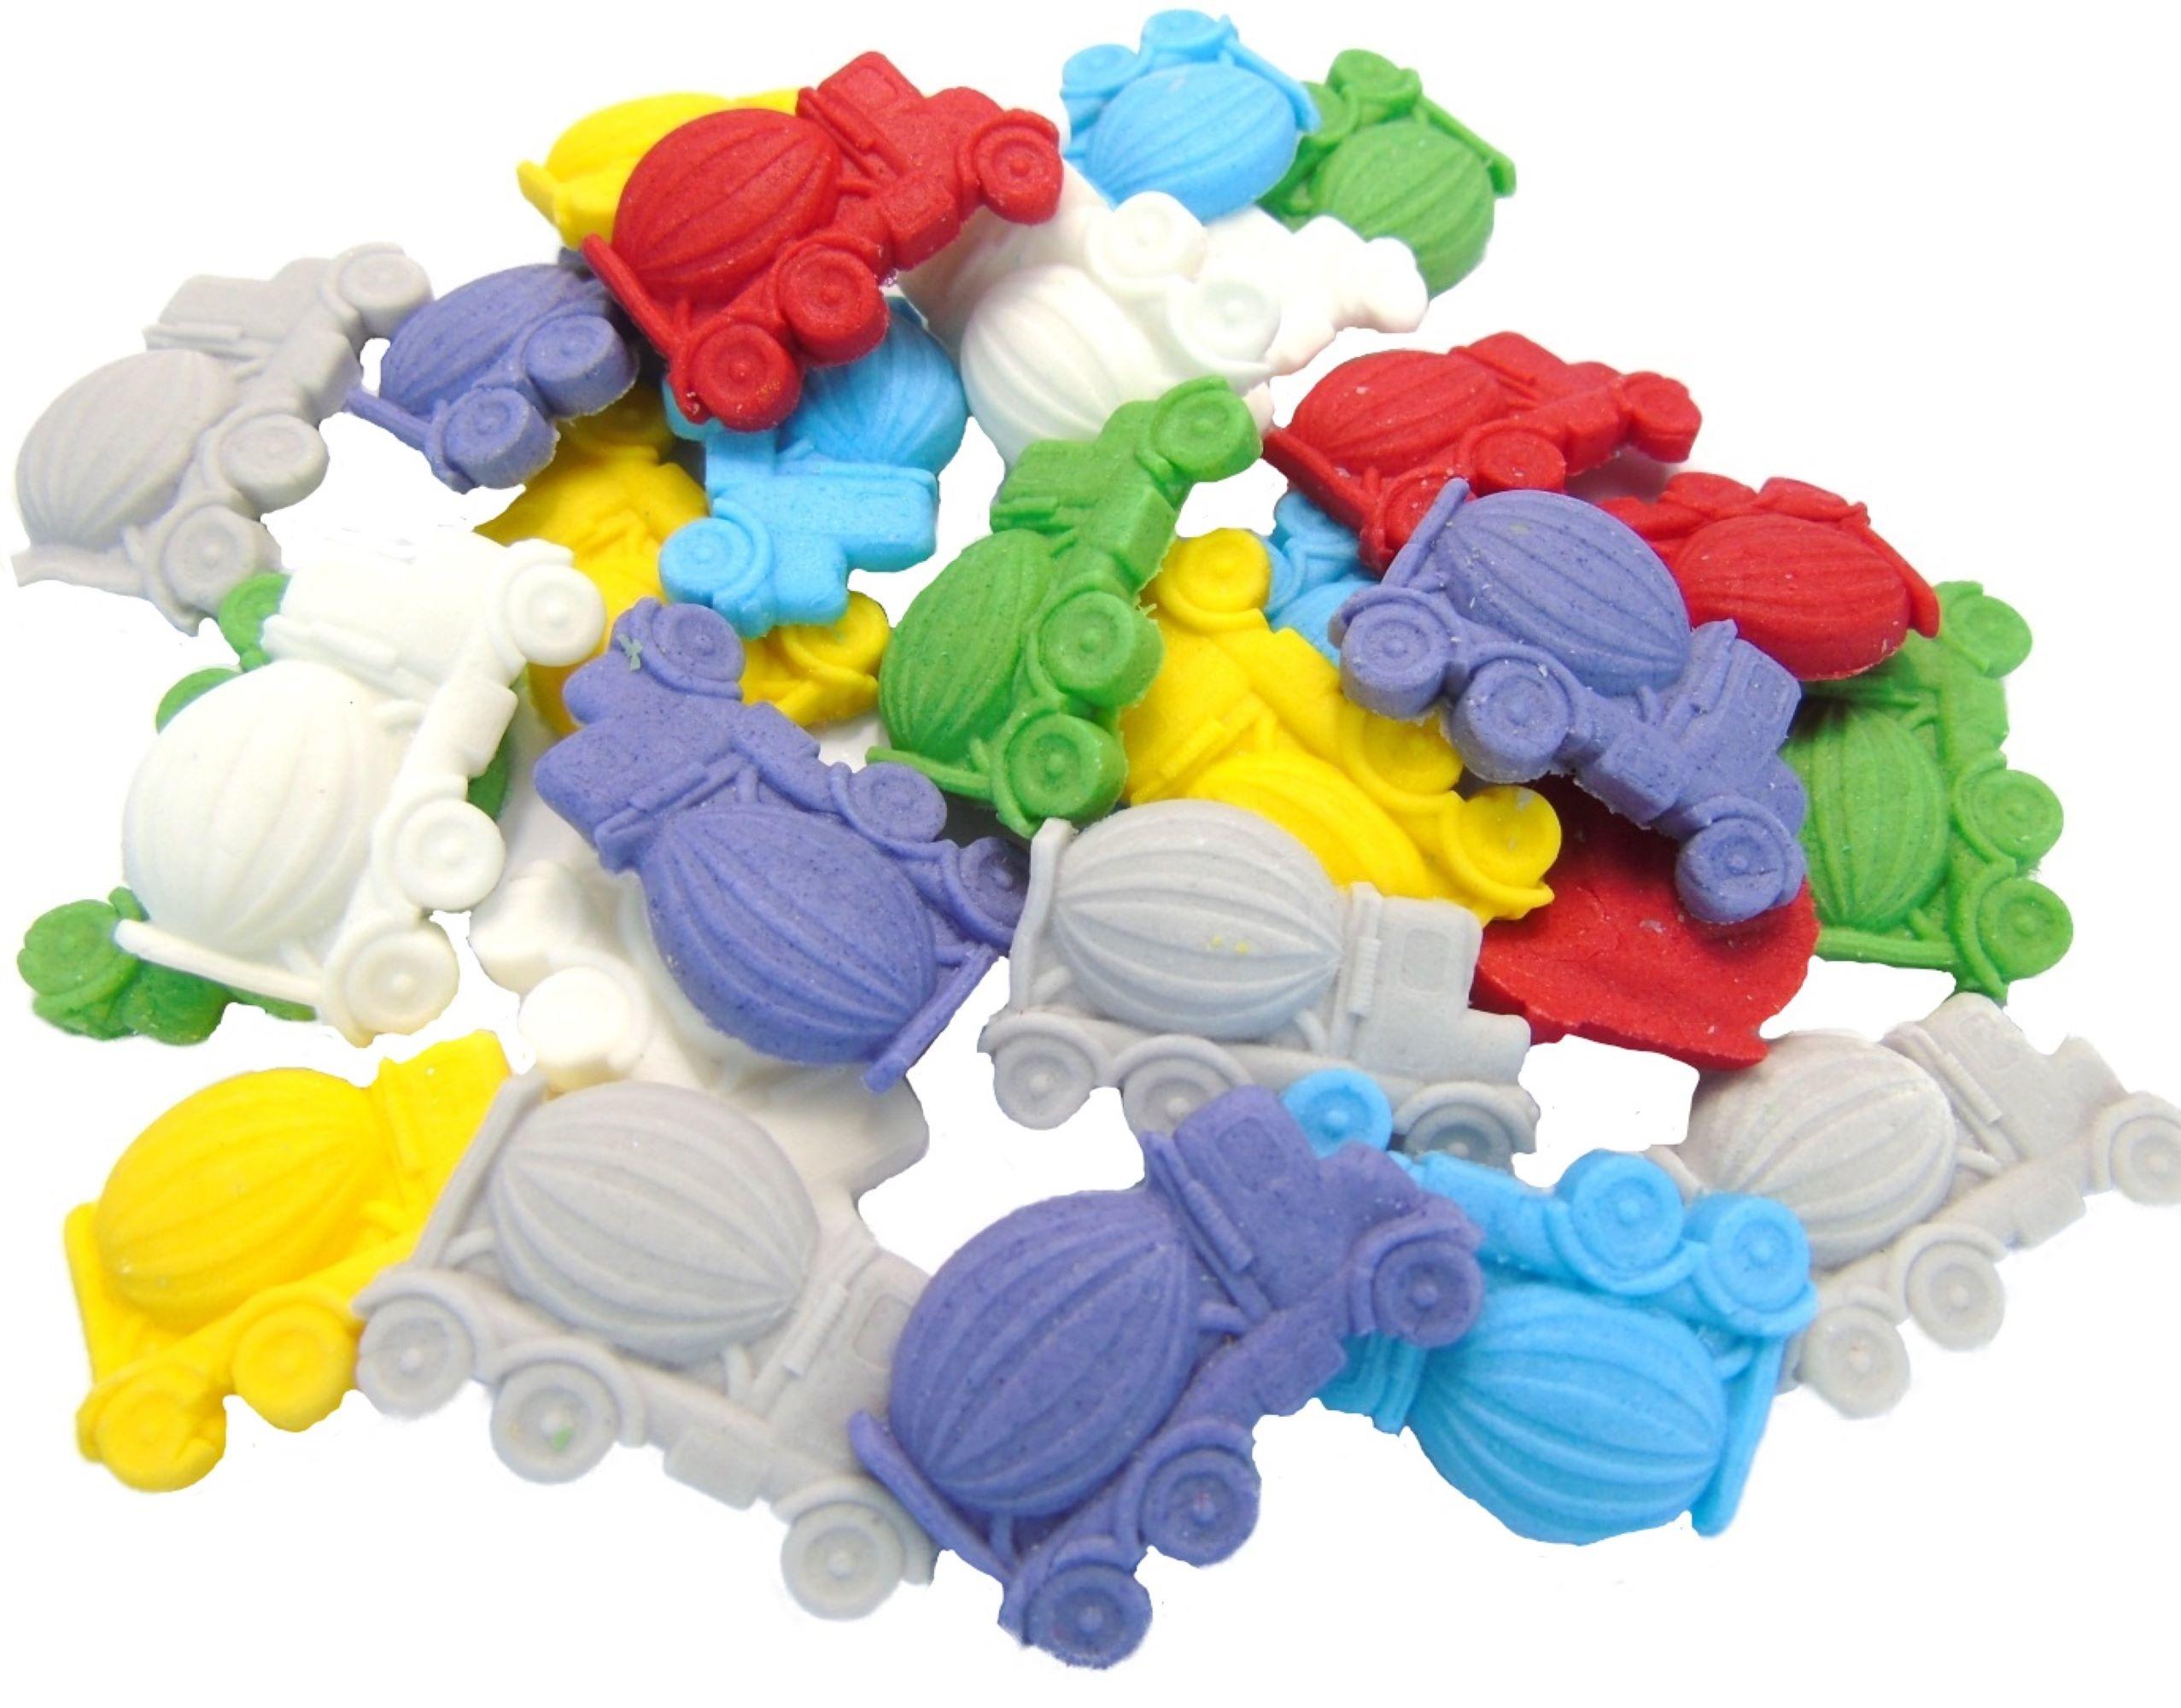 24 Novelty Truck Coloured Confetti Vegan Cupcake Toppers Cake Decorations